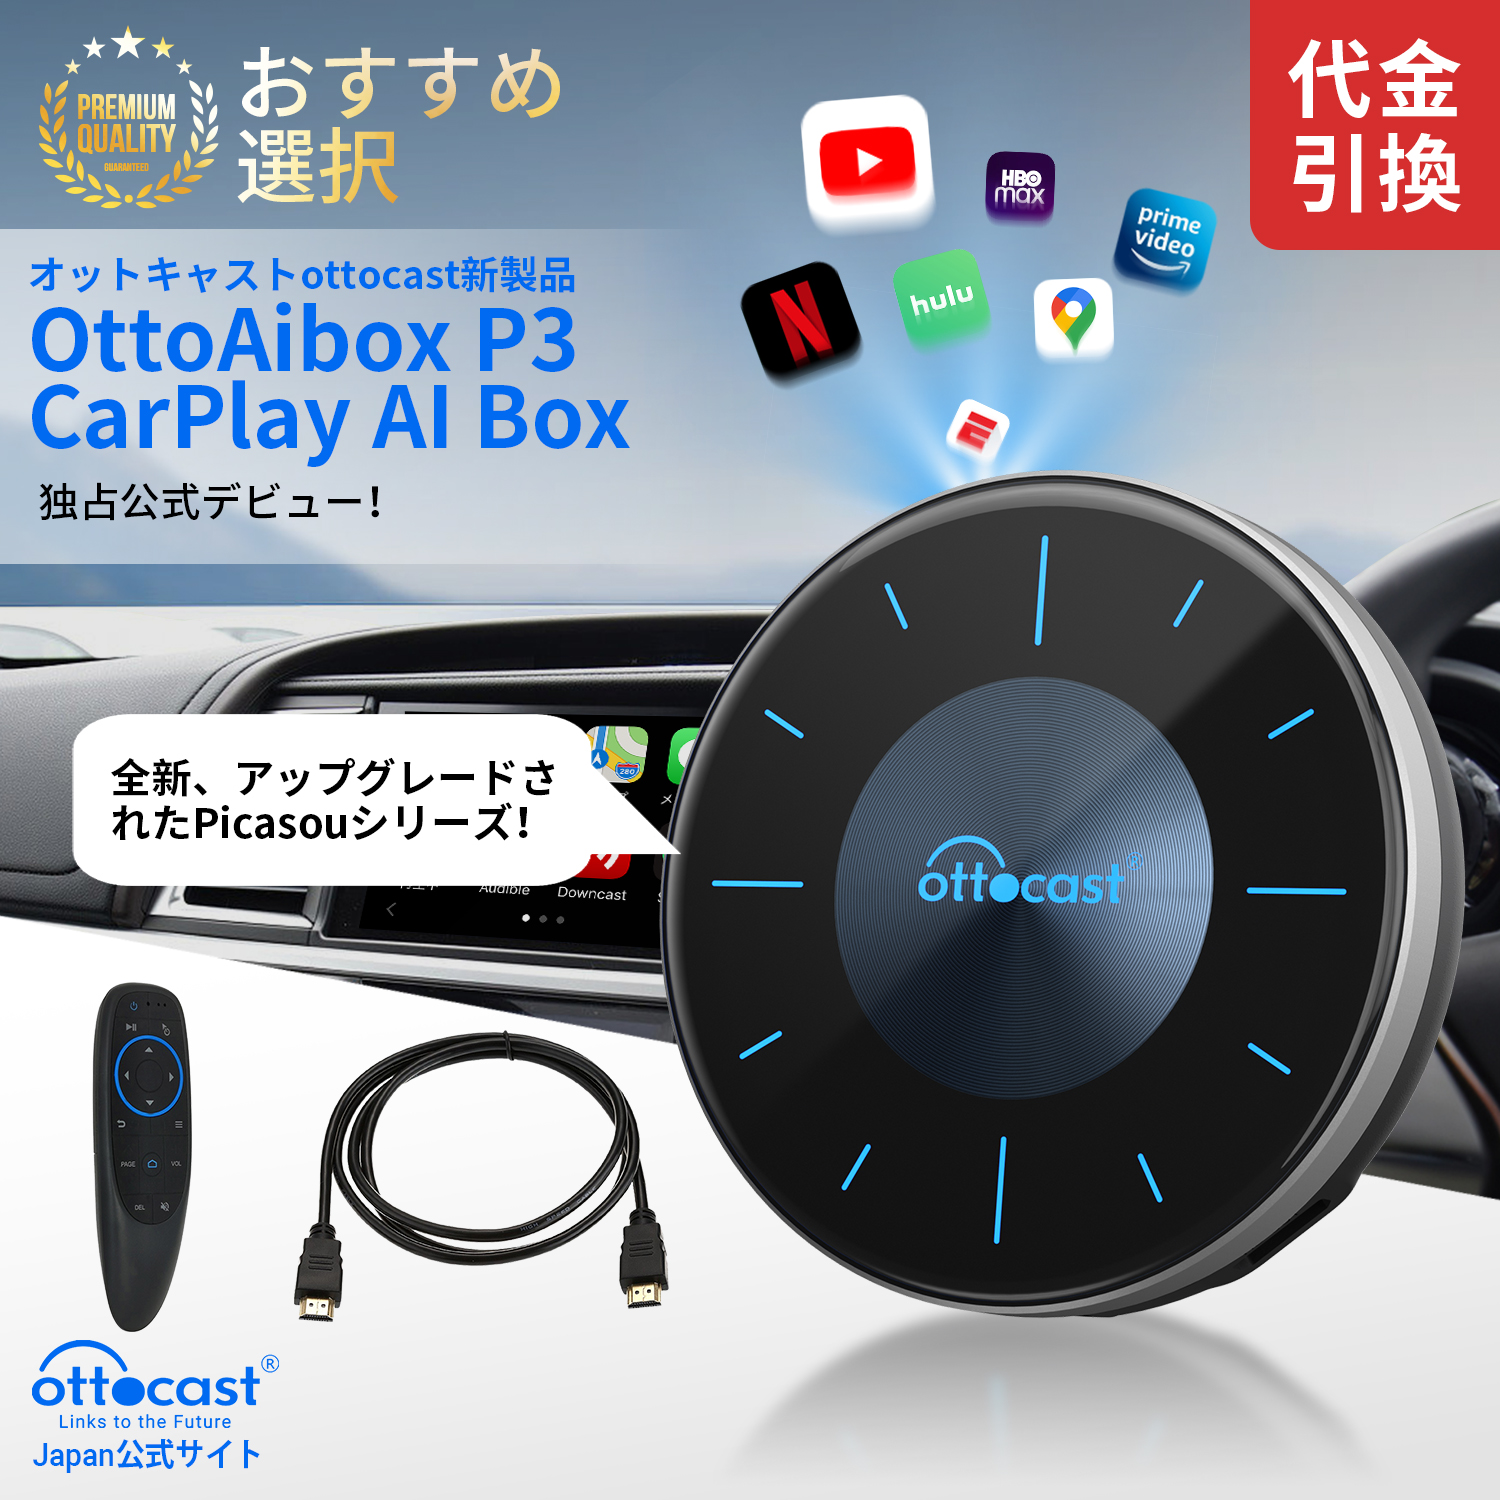 💥Ottocast new product, exclusive official debut! 💥OttoAibox P3 CarPlay AI  Box